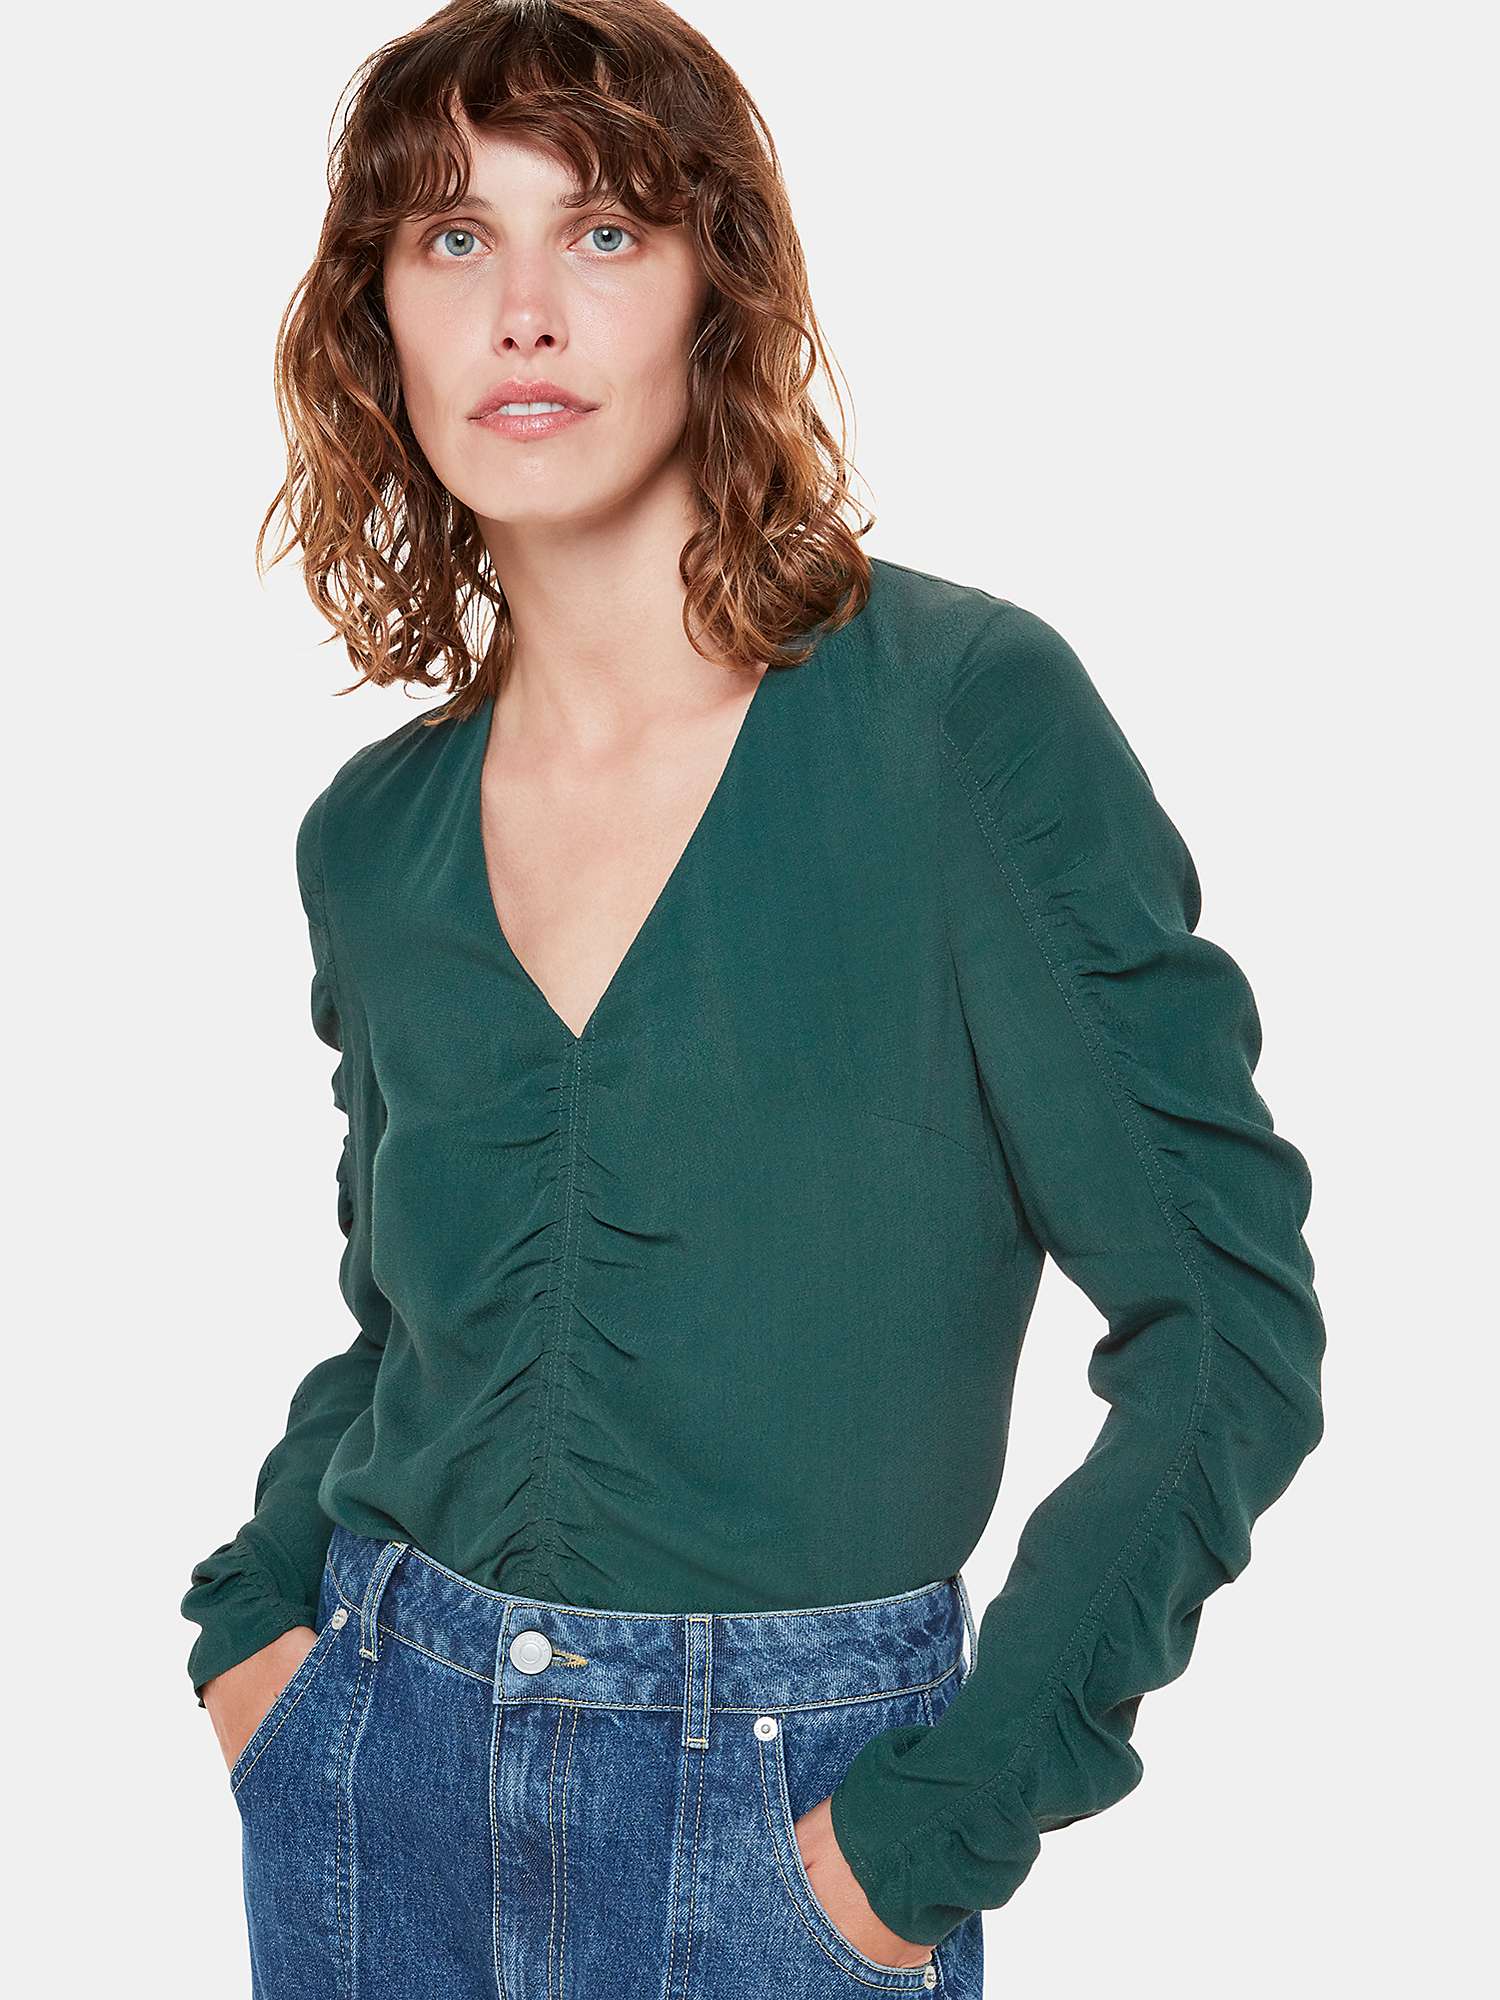 Buy Whistles Lily Gather Front Blouse, Forest Green Online at johnlewis.com